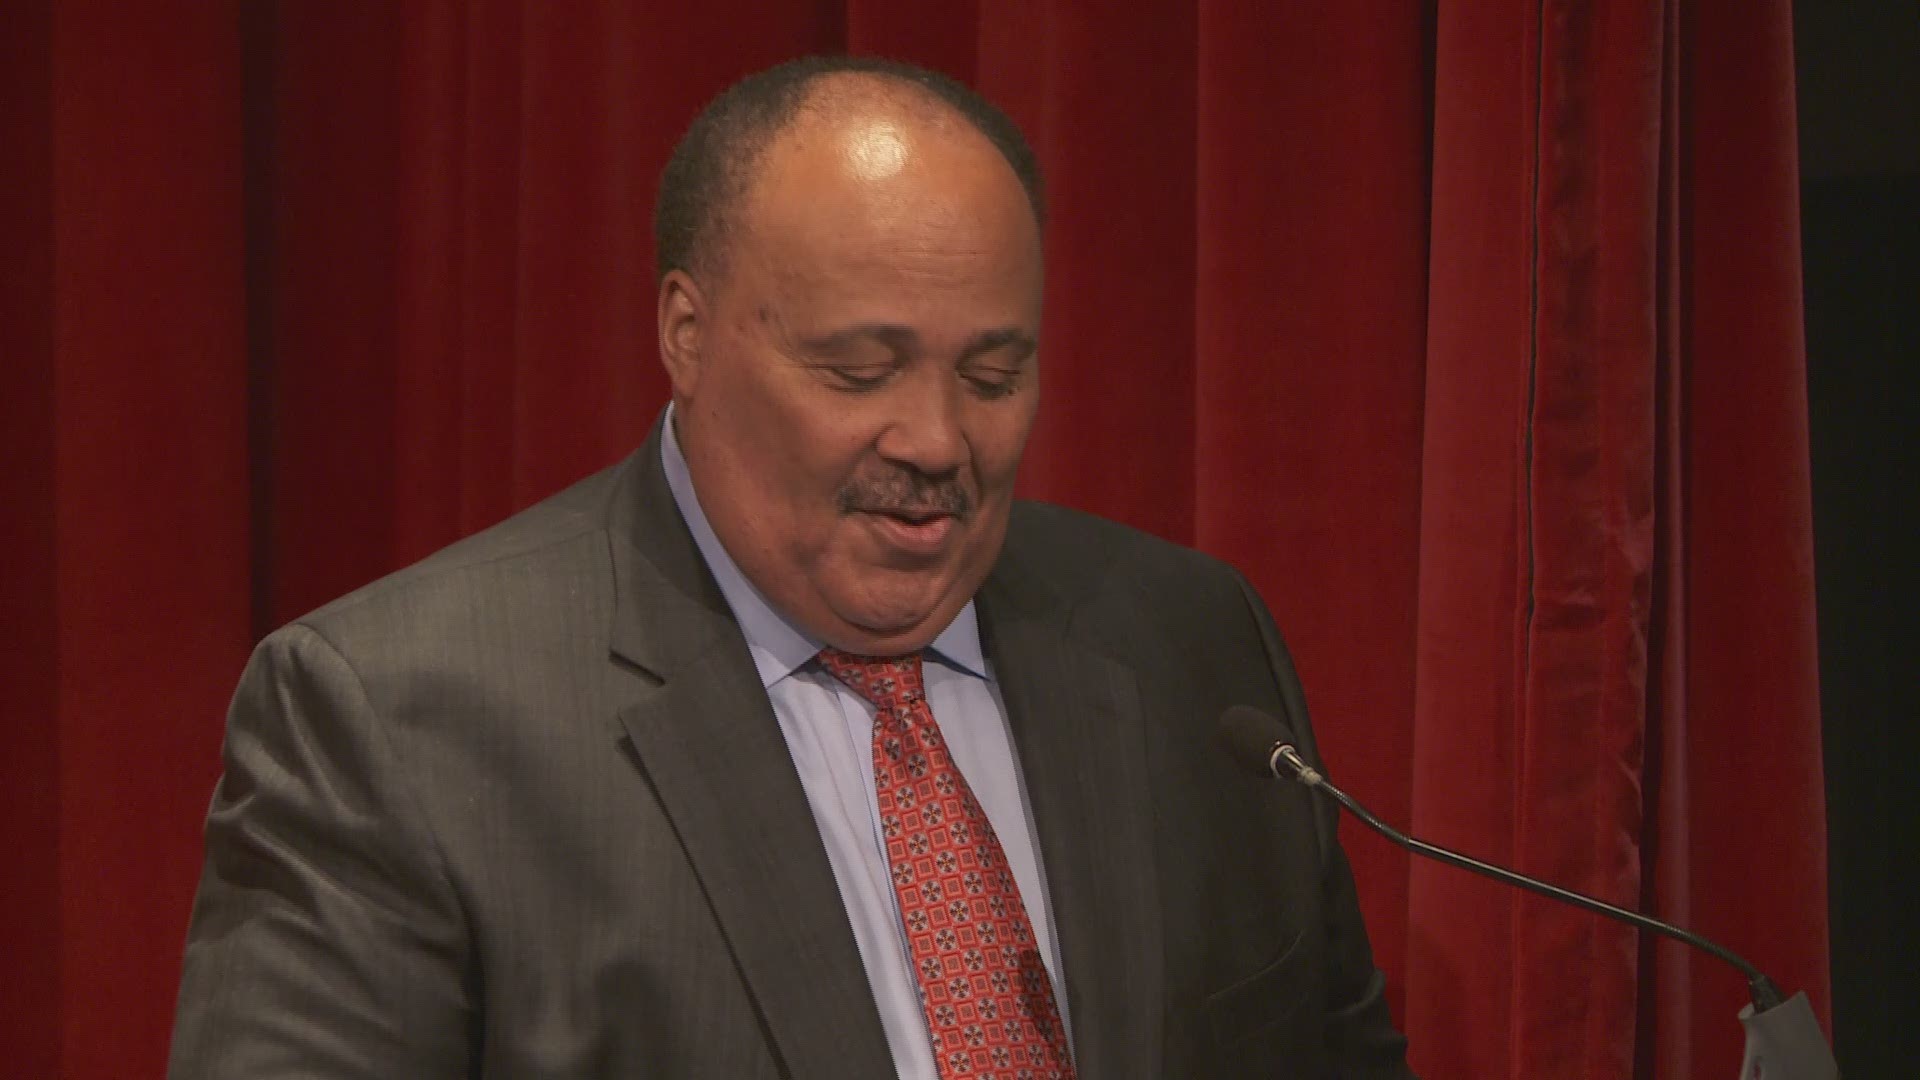 MLK III spoke about his father's legacy.